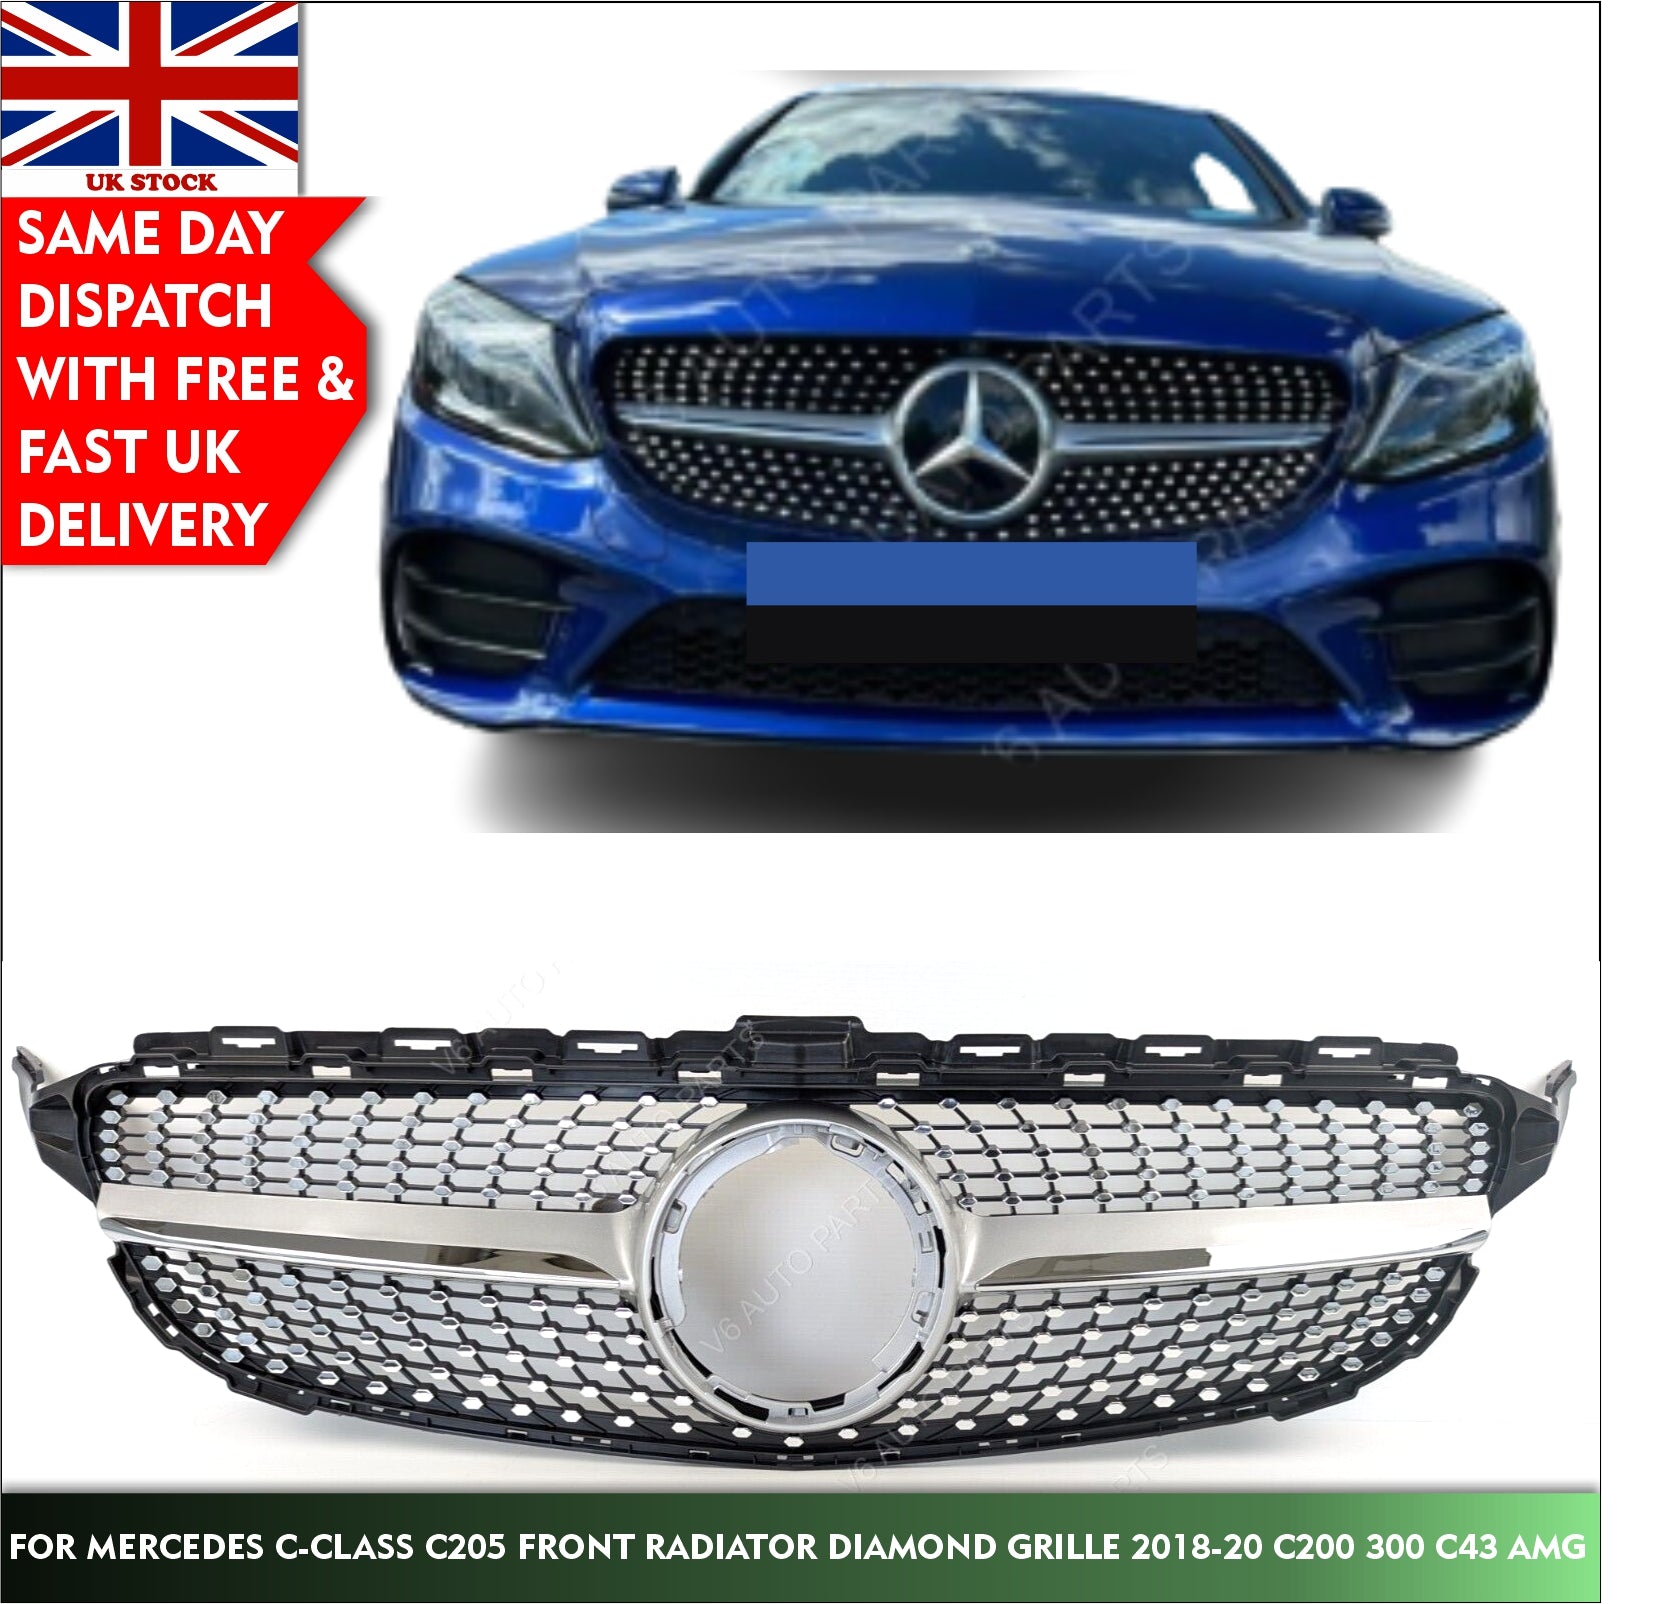 For Mercedes C-Class C205 Grill Front Radiator Grille 2018-2020 C200 300 C43 AMG